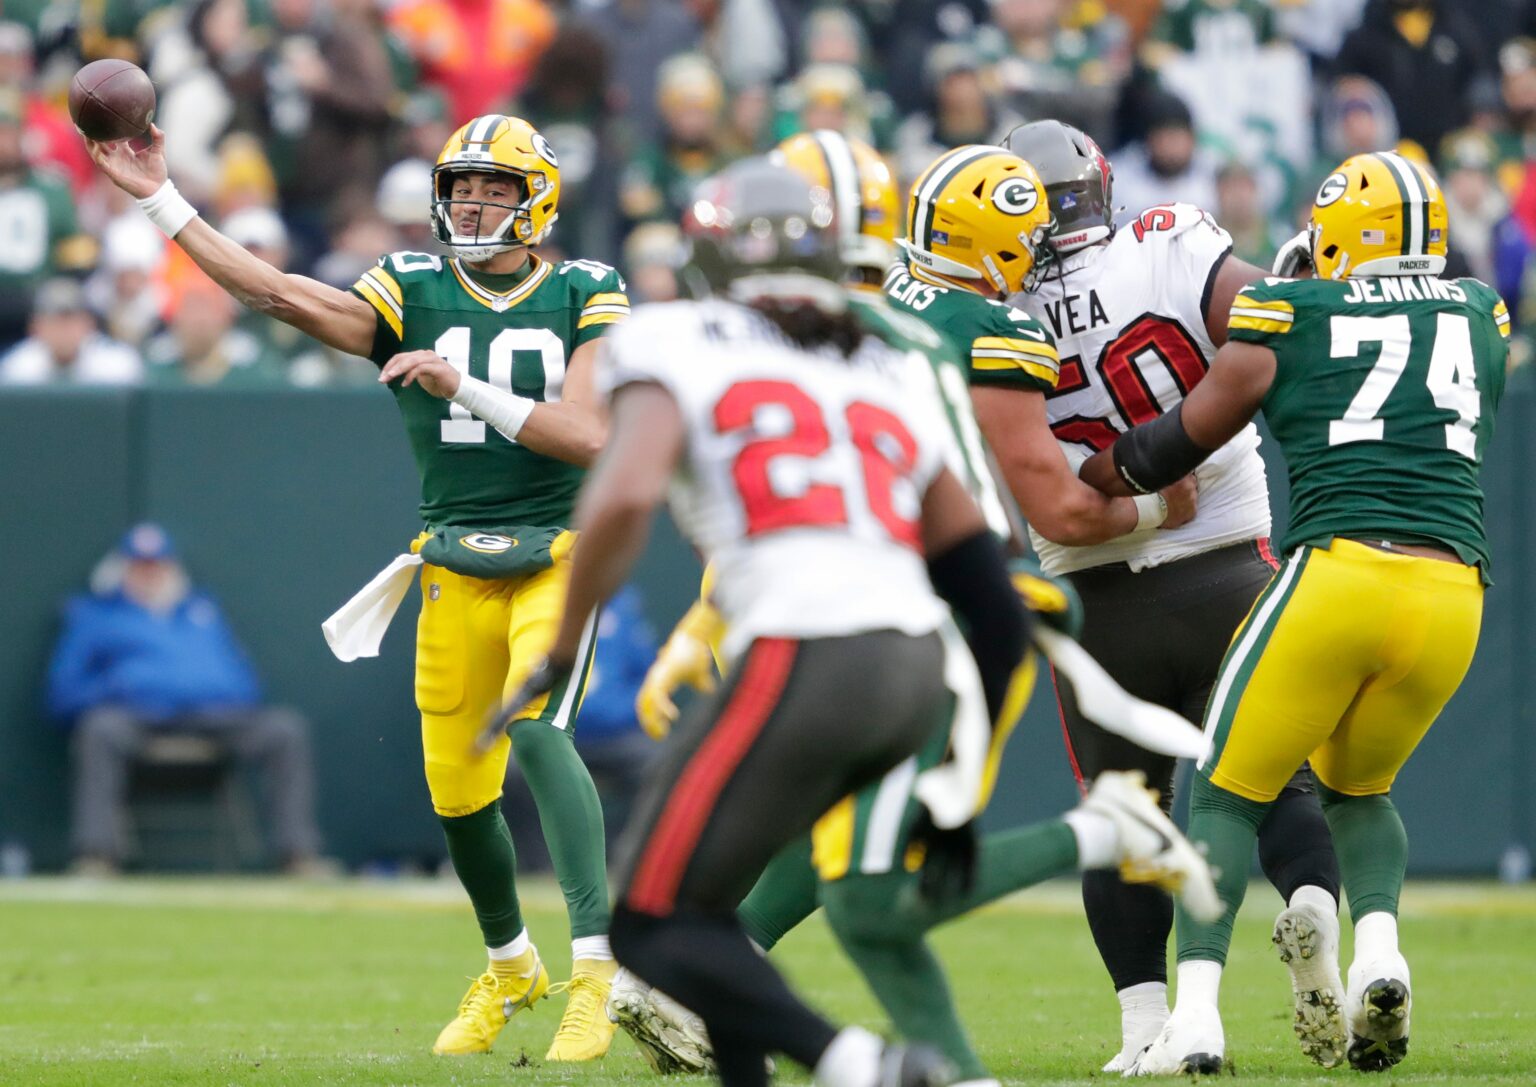 Green Bay Packers quarterback Jordan Love (10) passes the ball to wide receiver Jayden Reed (11) against the Tampa Bay Buccaneers during their football game Sunday, December 17, 2023, at Lambeau Field in Green Bay, Wis. © Dan Powers/USA TODAY NETWORK-Wisconsin / USA TODAY NETWORK